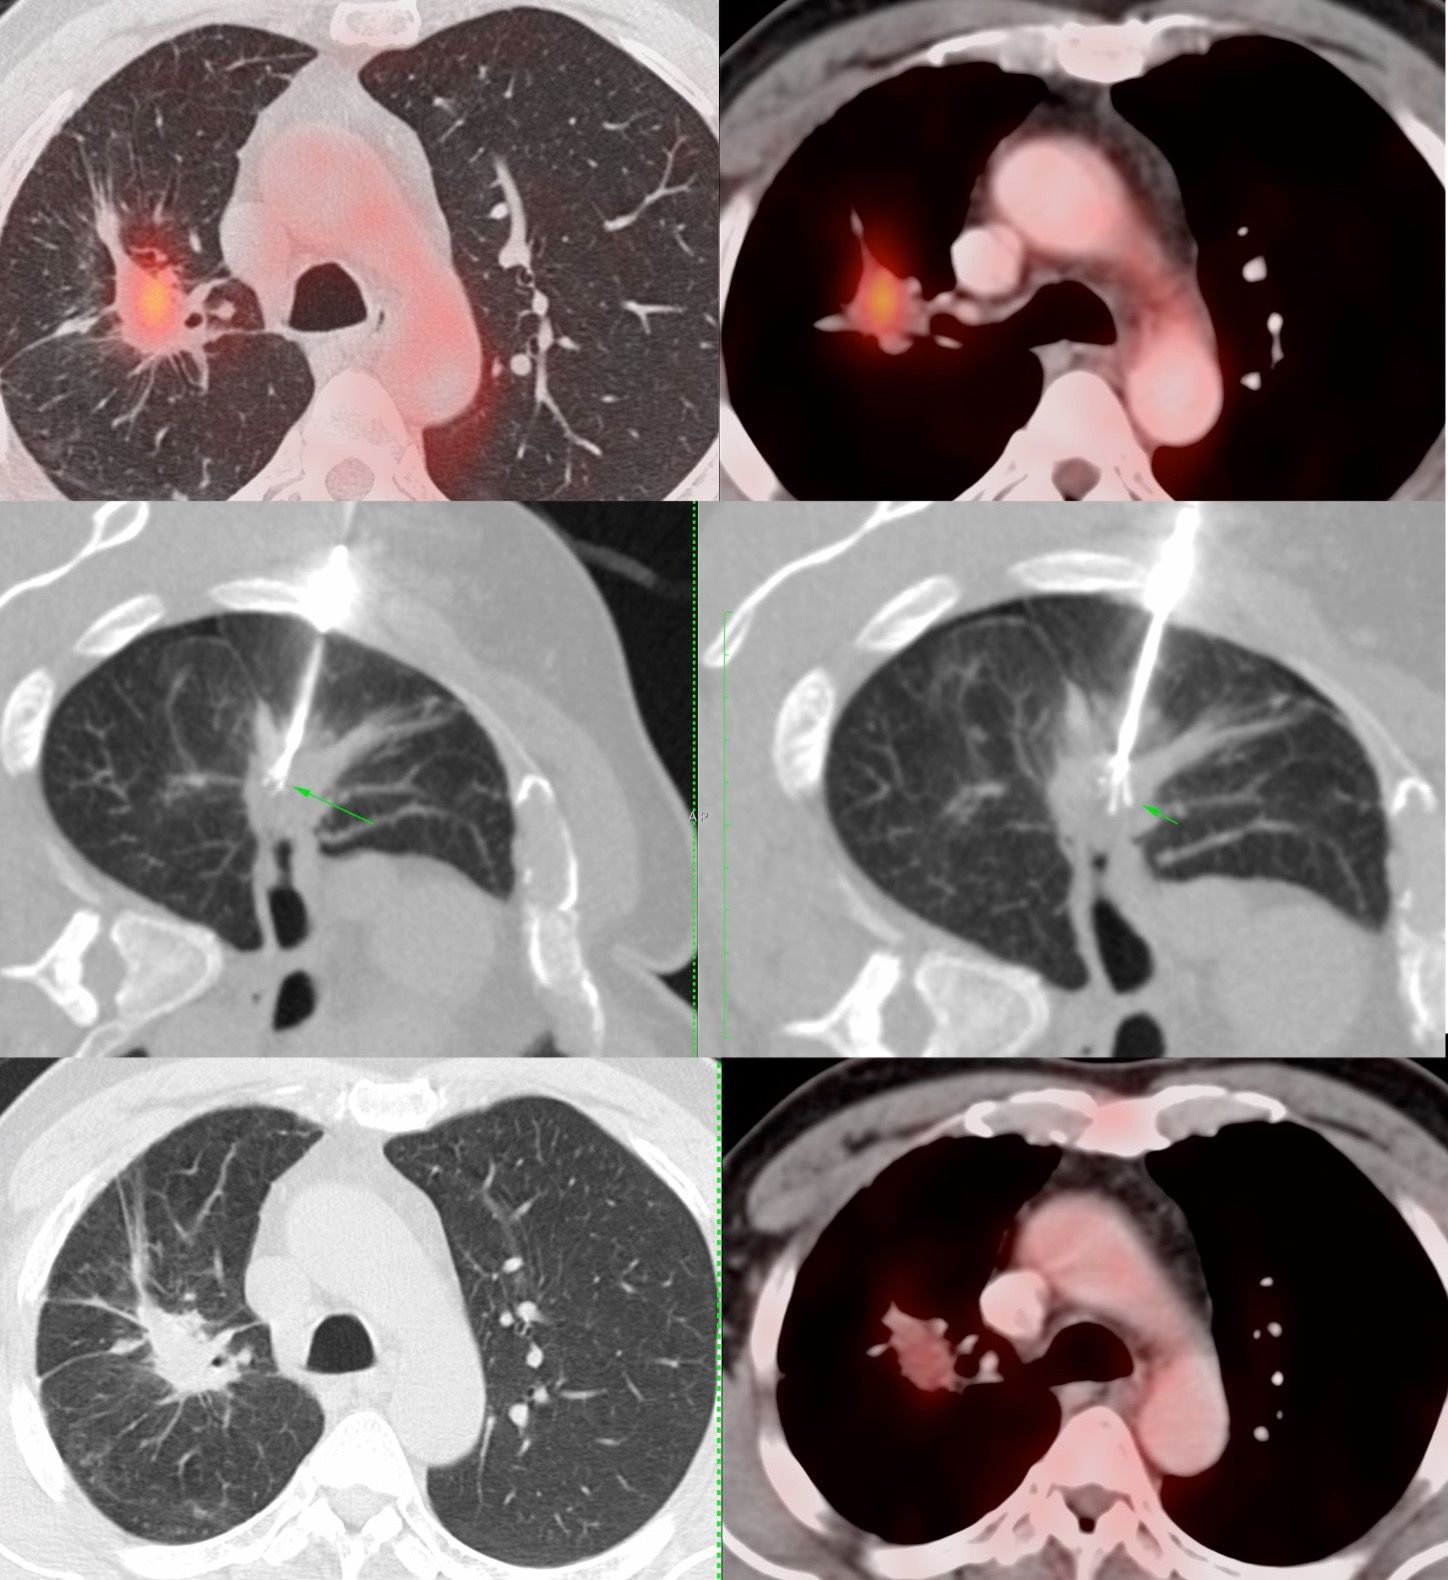 Case 41: Radiofrequency Ablation (RFA) of a Peri-Hilar Lung Mass